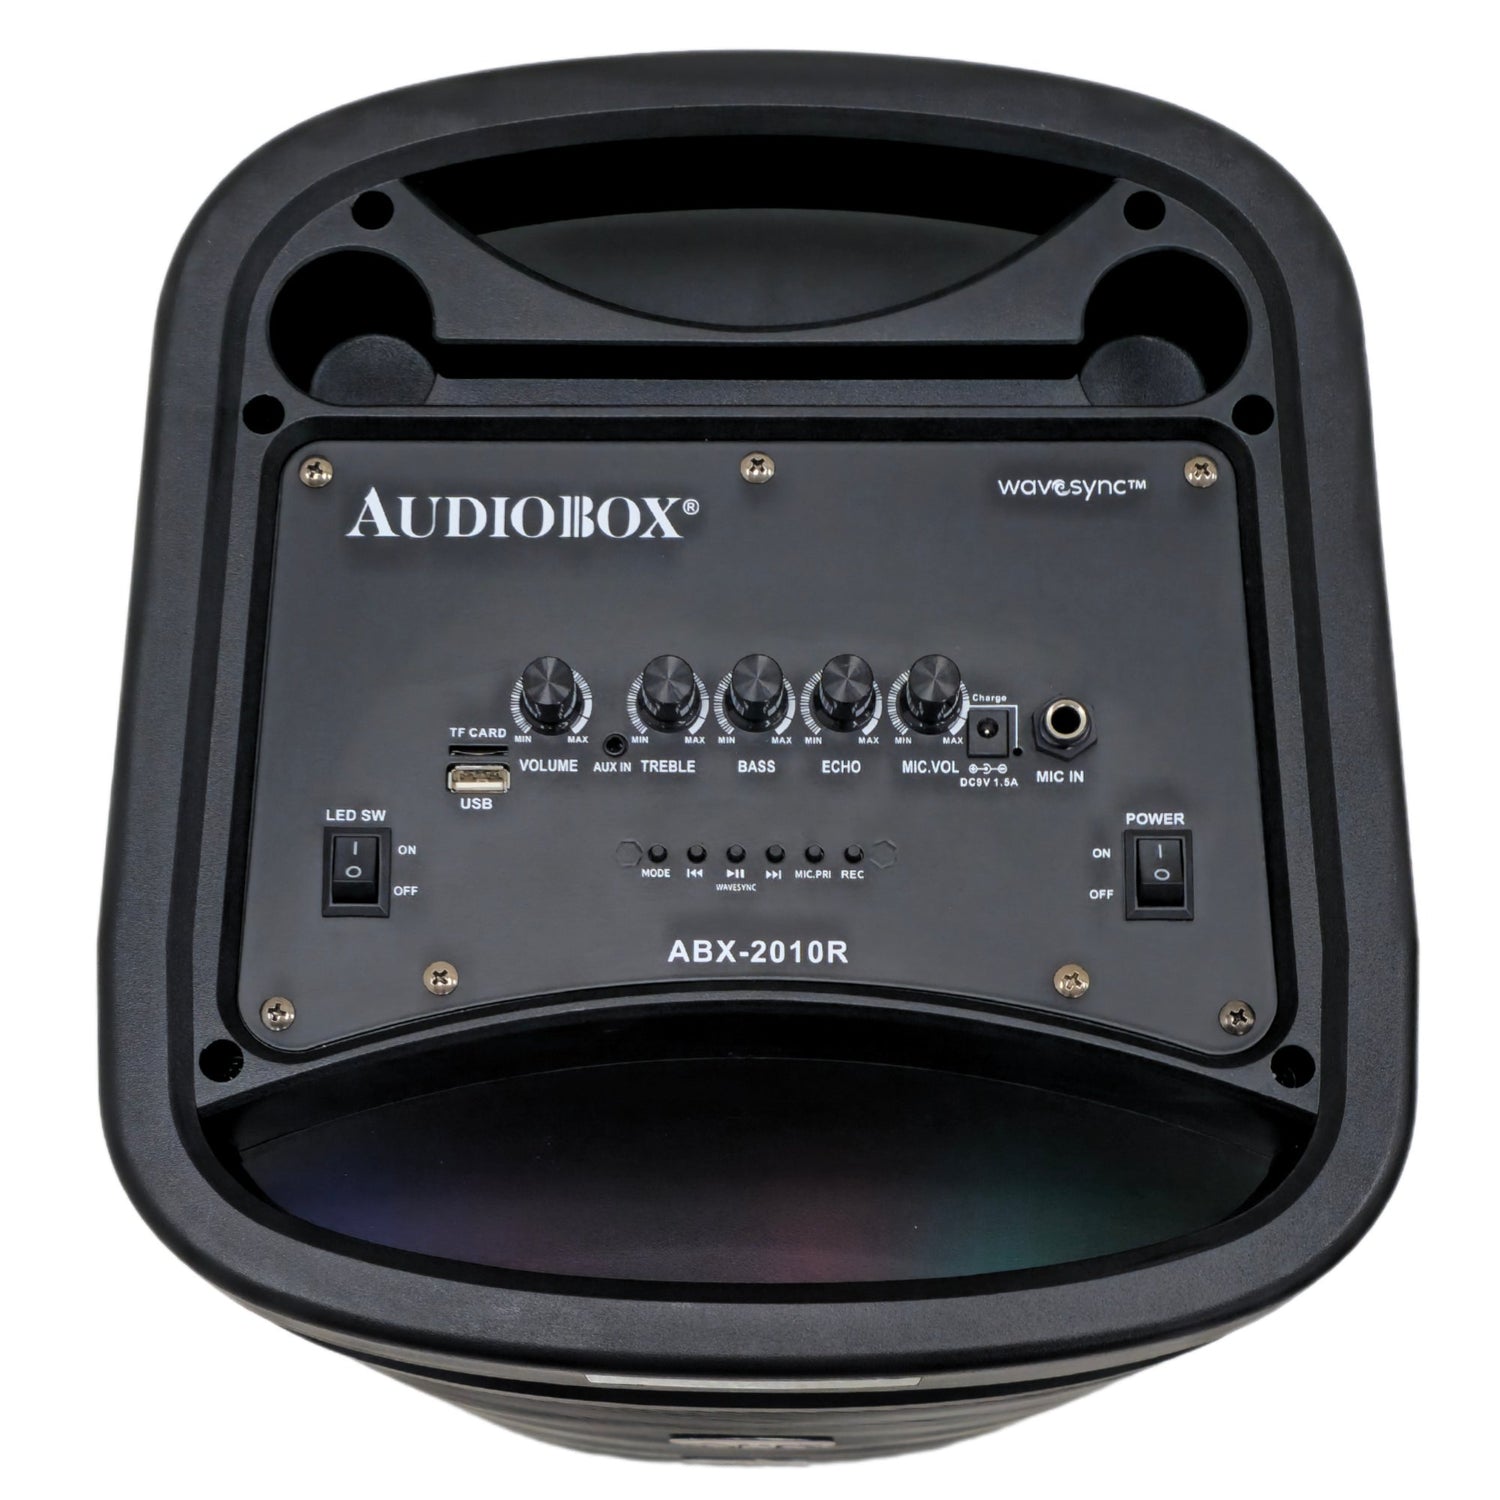 Audiobox ABX-2010R Dual 10” Portable Karaoke Party Speaker with LED Light Show and Wired Microphone - Bluetooth, USB, TF Card, FM Radio - Top ElectrosKaraoke SpeakerABX-2010R810059432017